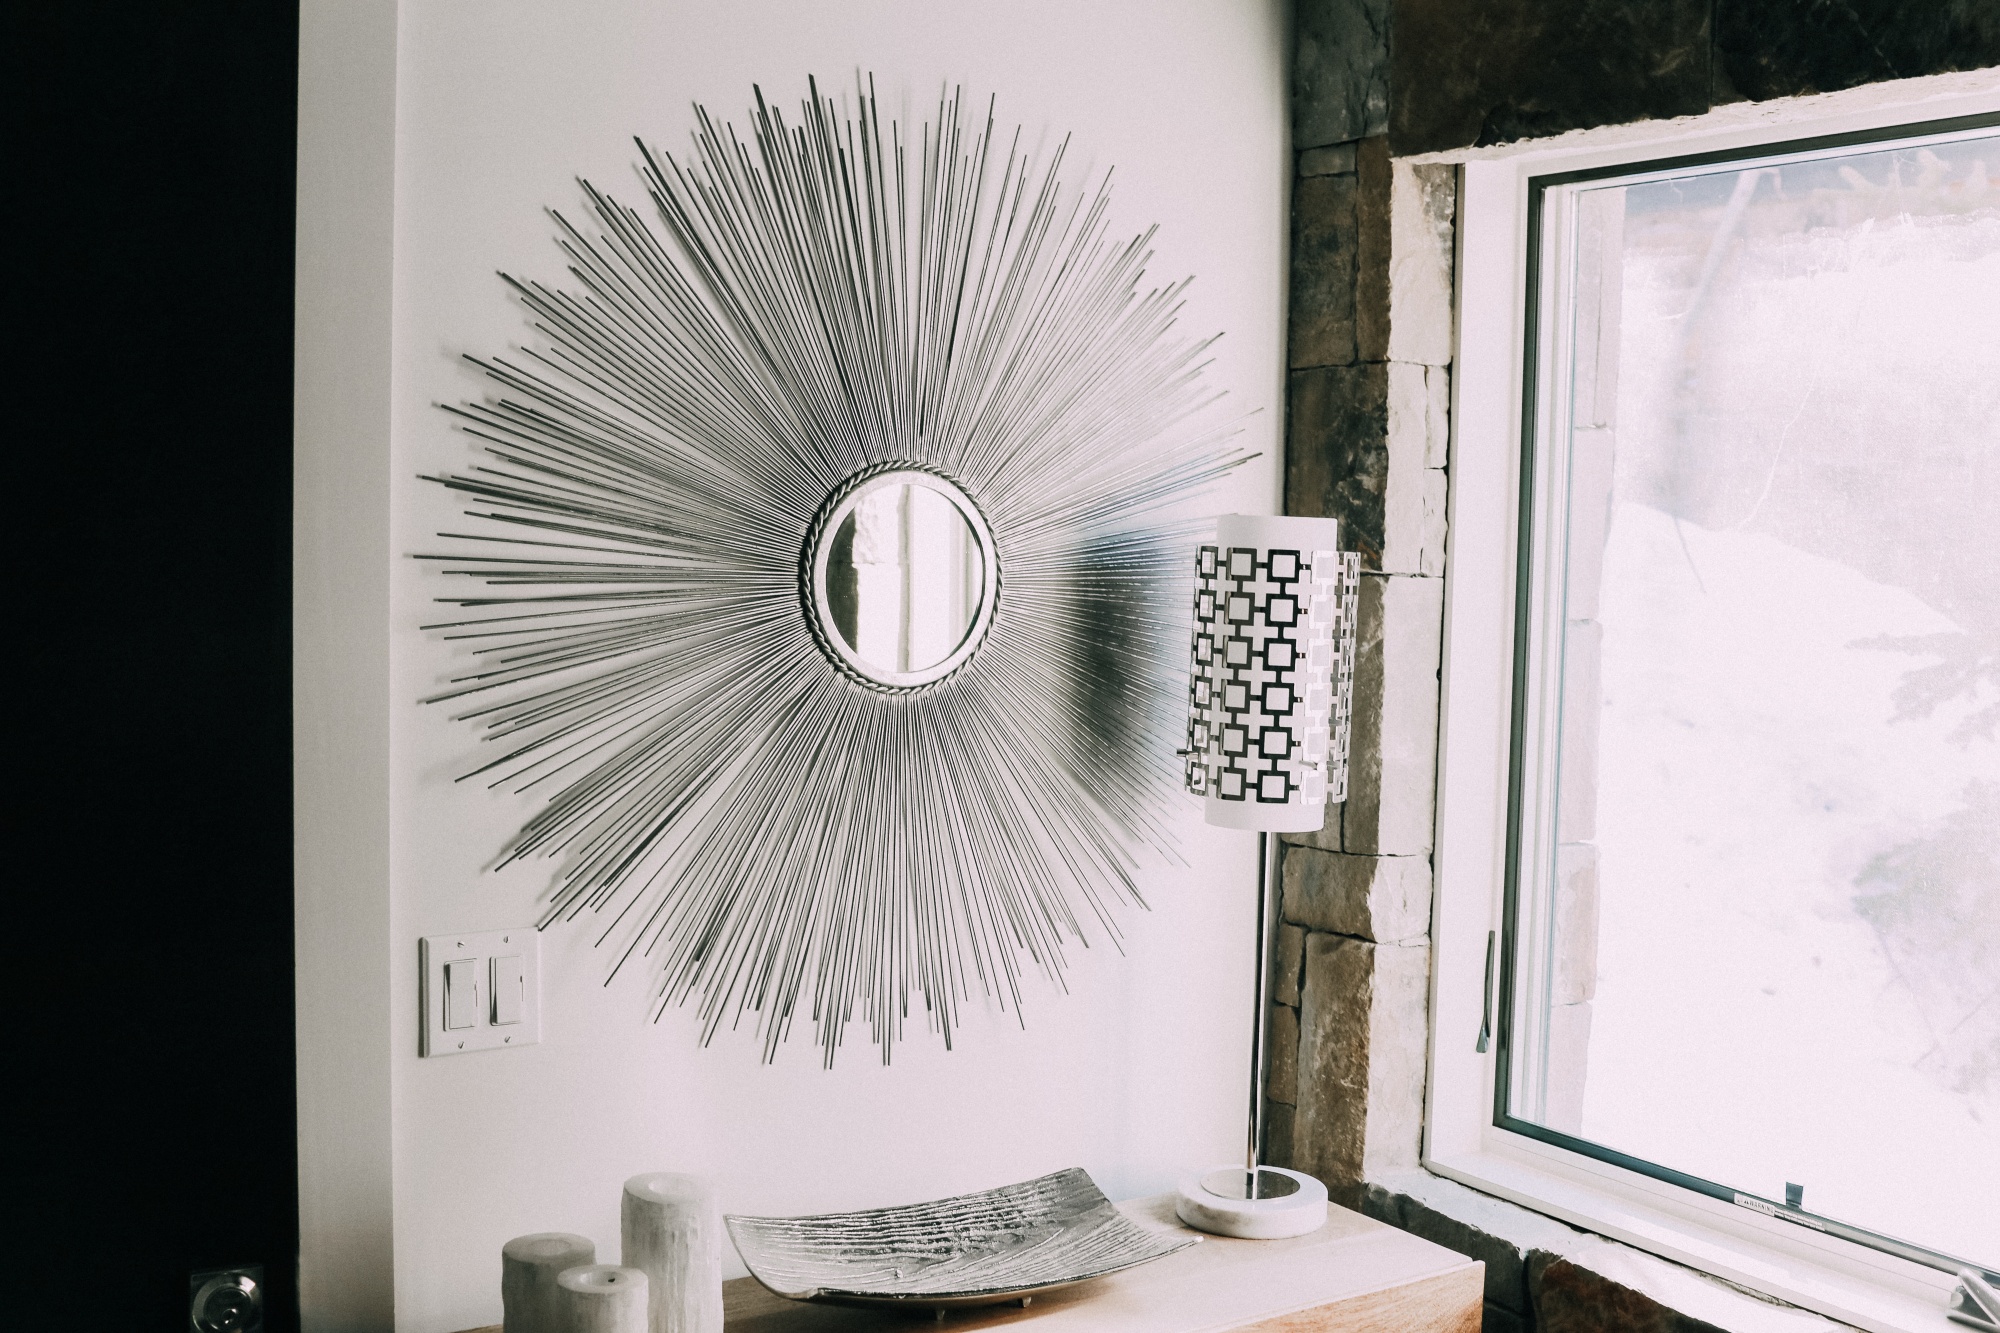 Sunburst mirrors, fashion blogger Erin Busbee of Busbee Style sharing her favorite sunburst mirrors in your home